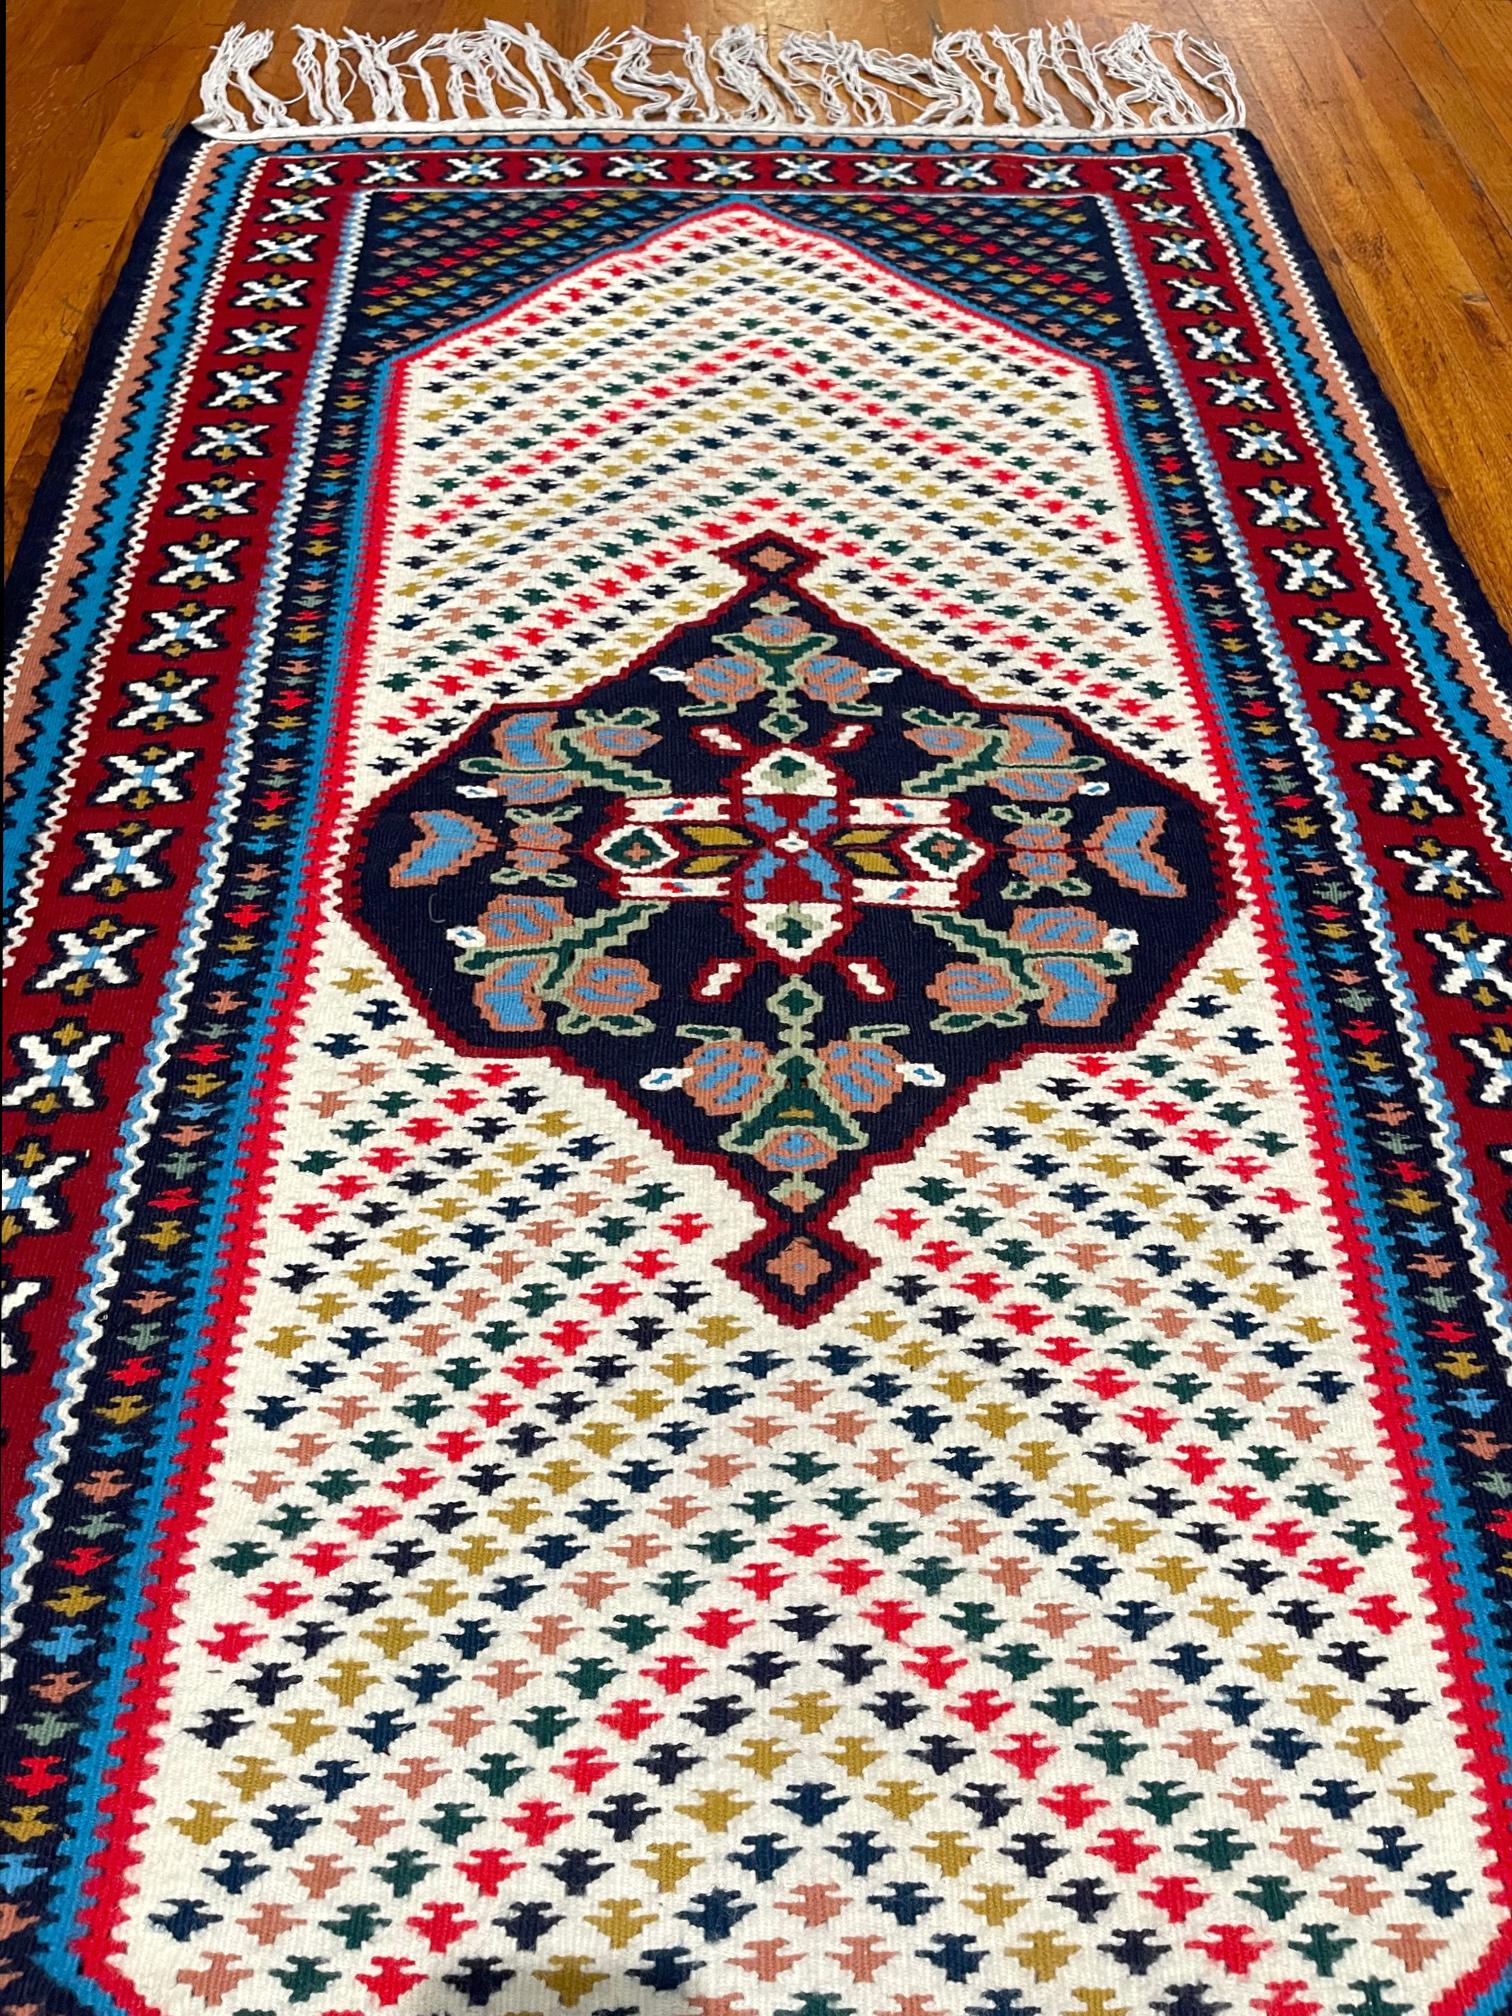 This rug is a Persian Shiraz Kilim which is a type of brocading or flat-woven pile. This is flat weave is very sturdy and reversible. The pile is with cotton foundation. The design is geometric with fish pattern.  The base color is cream and the